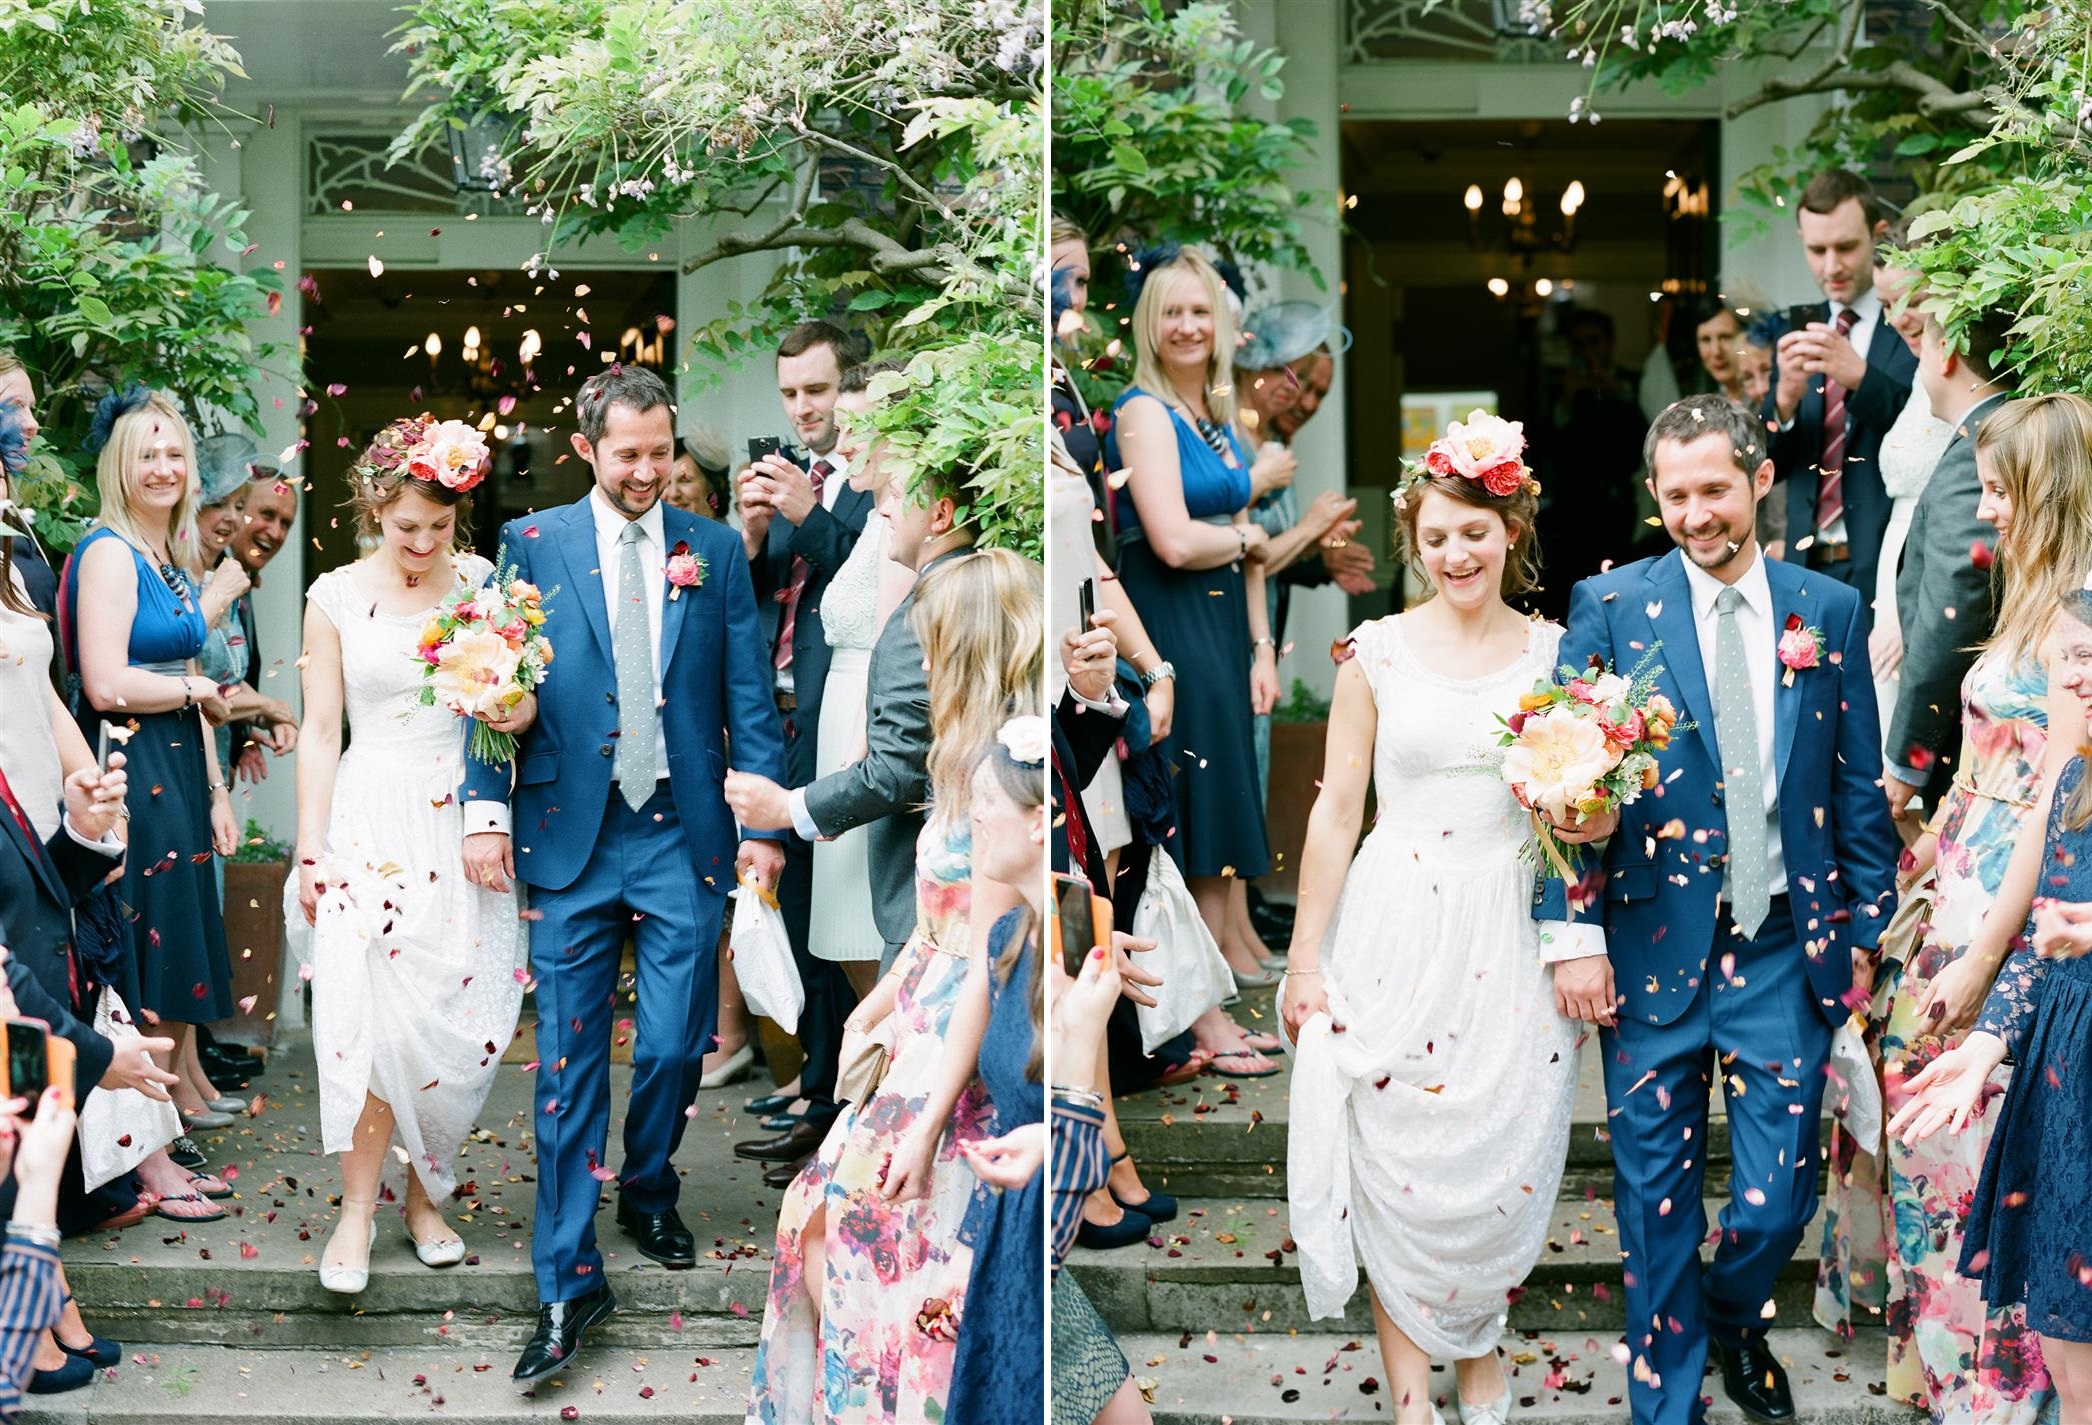 Confetti Toss - A 1940s Wedding Dress for a Sweet Early Summer Wedding from Taylor & Porter Photography